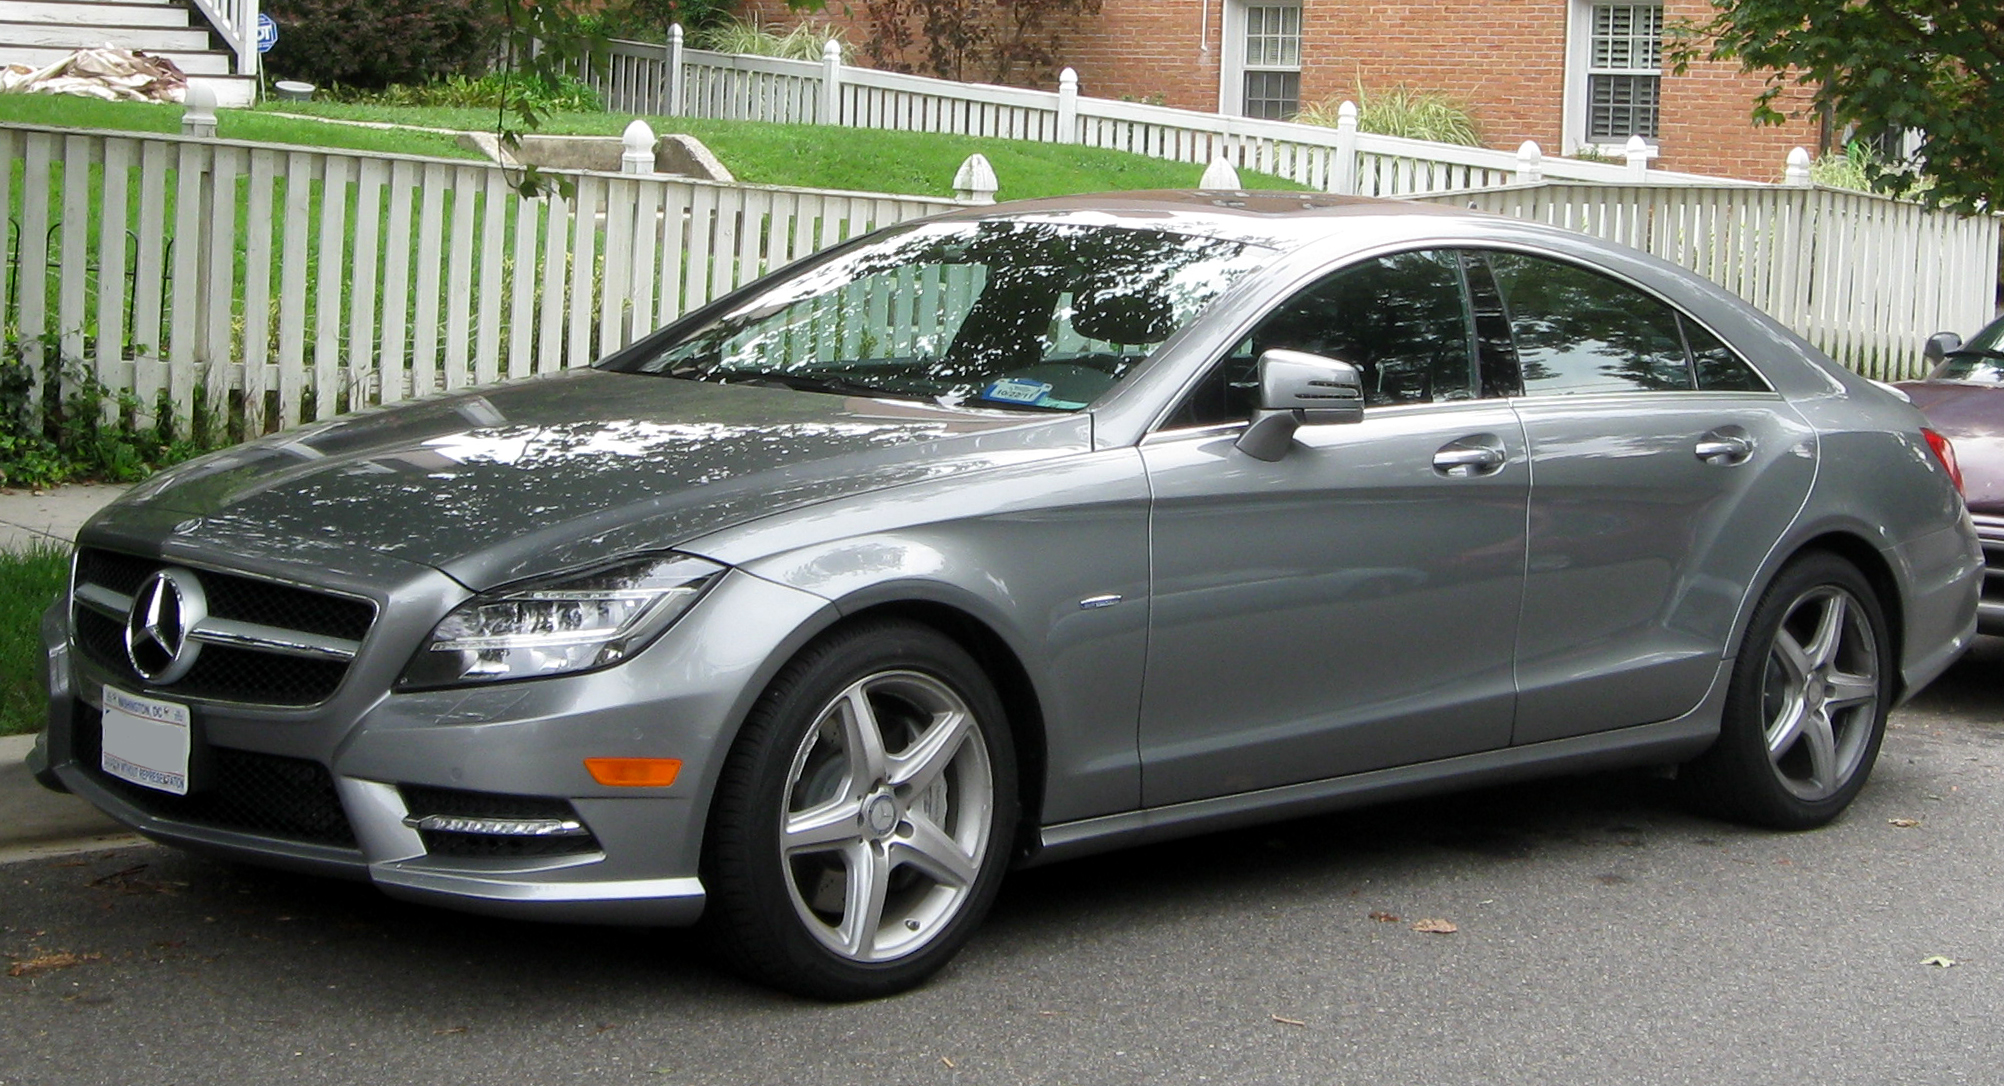 File:2012 Mercedes-Benz CLS -- 09-05-2011 1.jpg - Wikimedia Commons